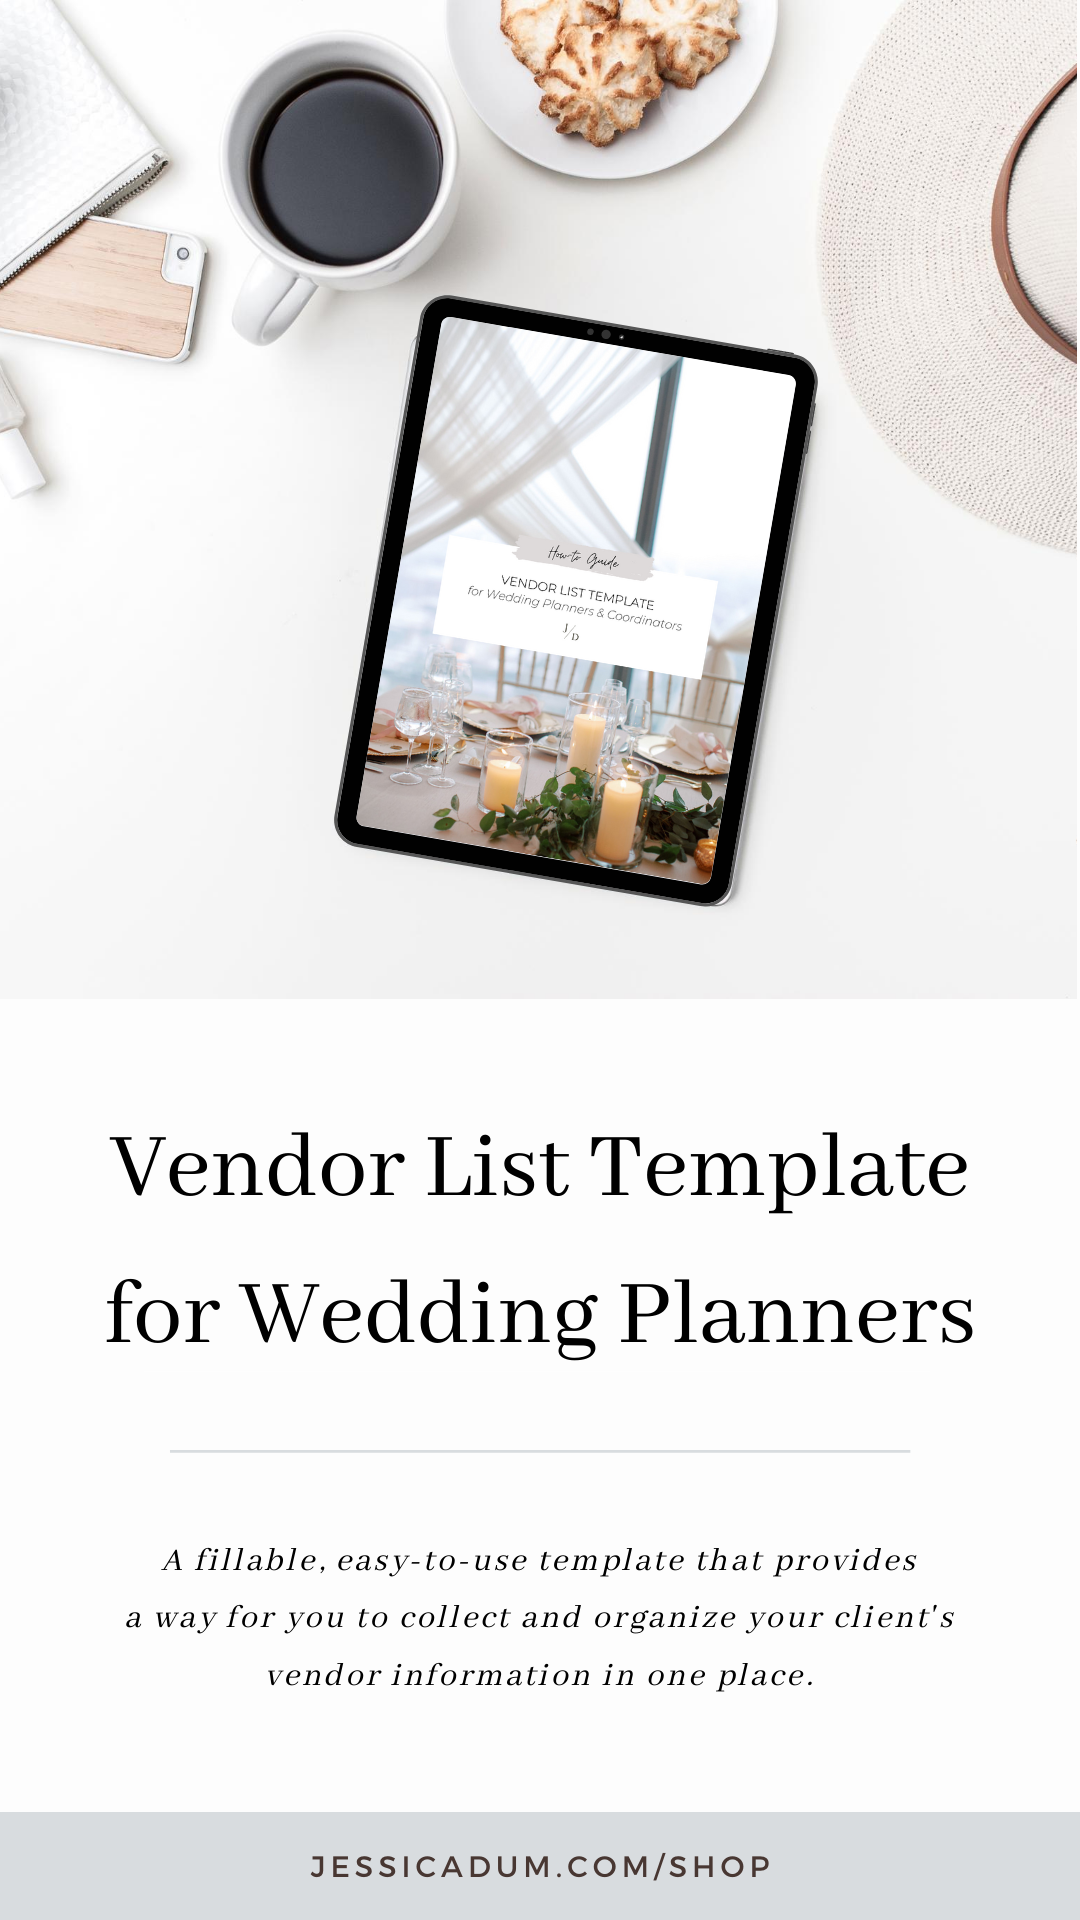 Snag my Vendor List Template for Wedding Planners. Get the exact template I use for collecting all wedding vendor contact information from my wedding clients. Save time in your wedding planning business by implementing a vendor list template for your clients to fill out - or snag the exact template my team and I use! | Wedding Planner Resources